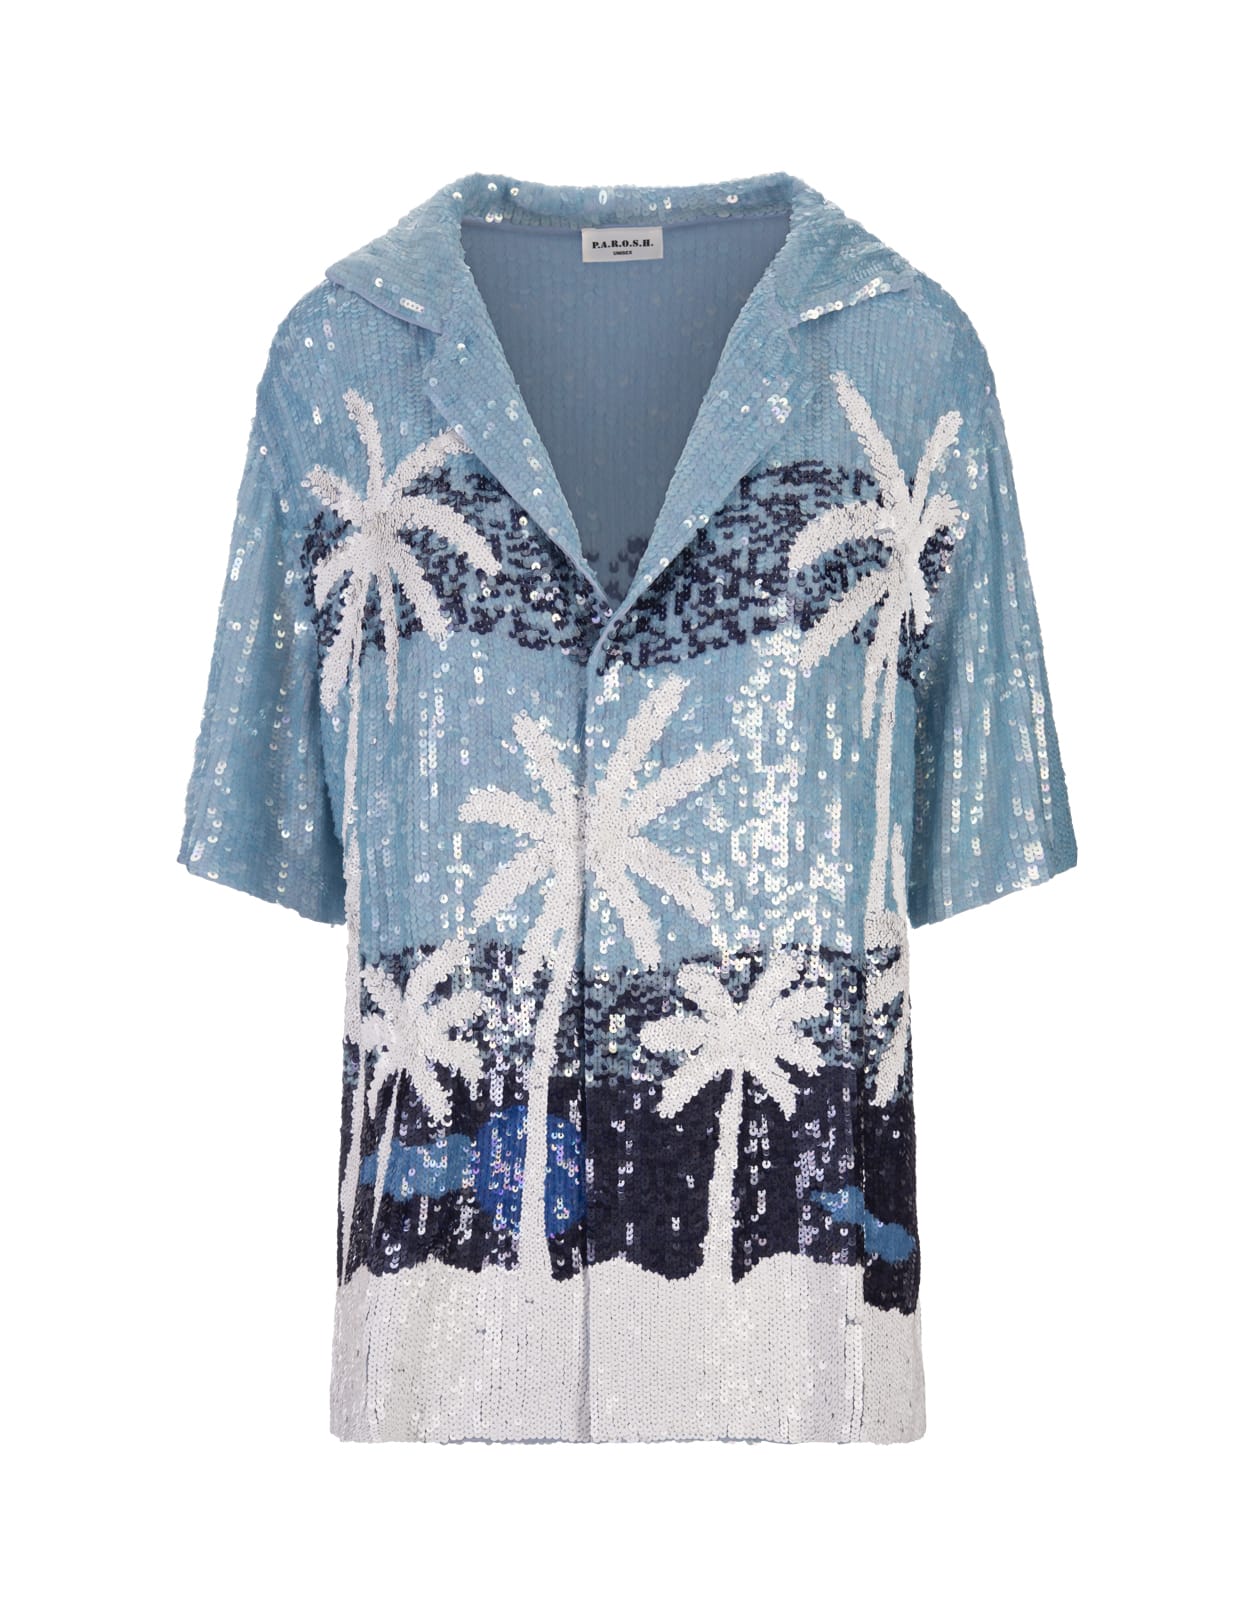 Shop P.a.r.o.s.h White Tropical Patterns Casual Style Short Sleeves Shirt In Blue